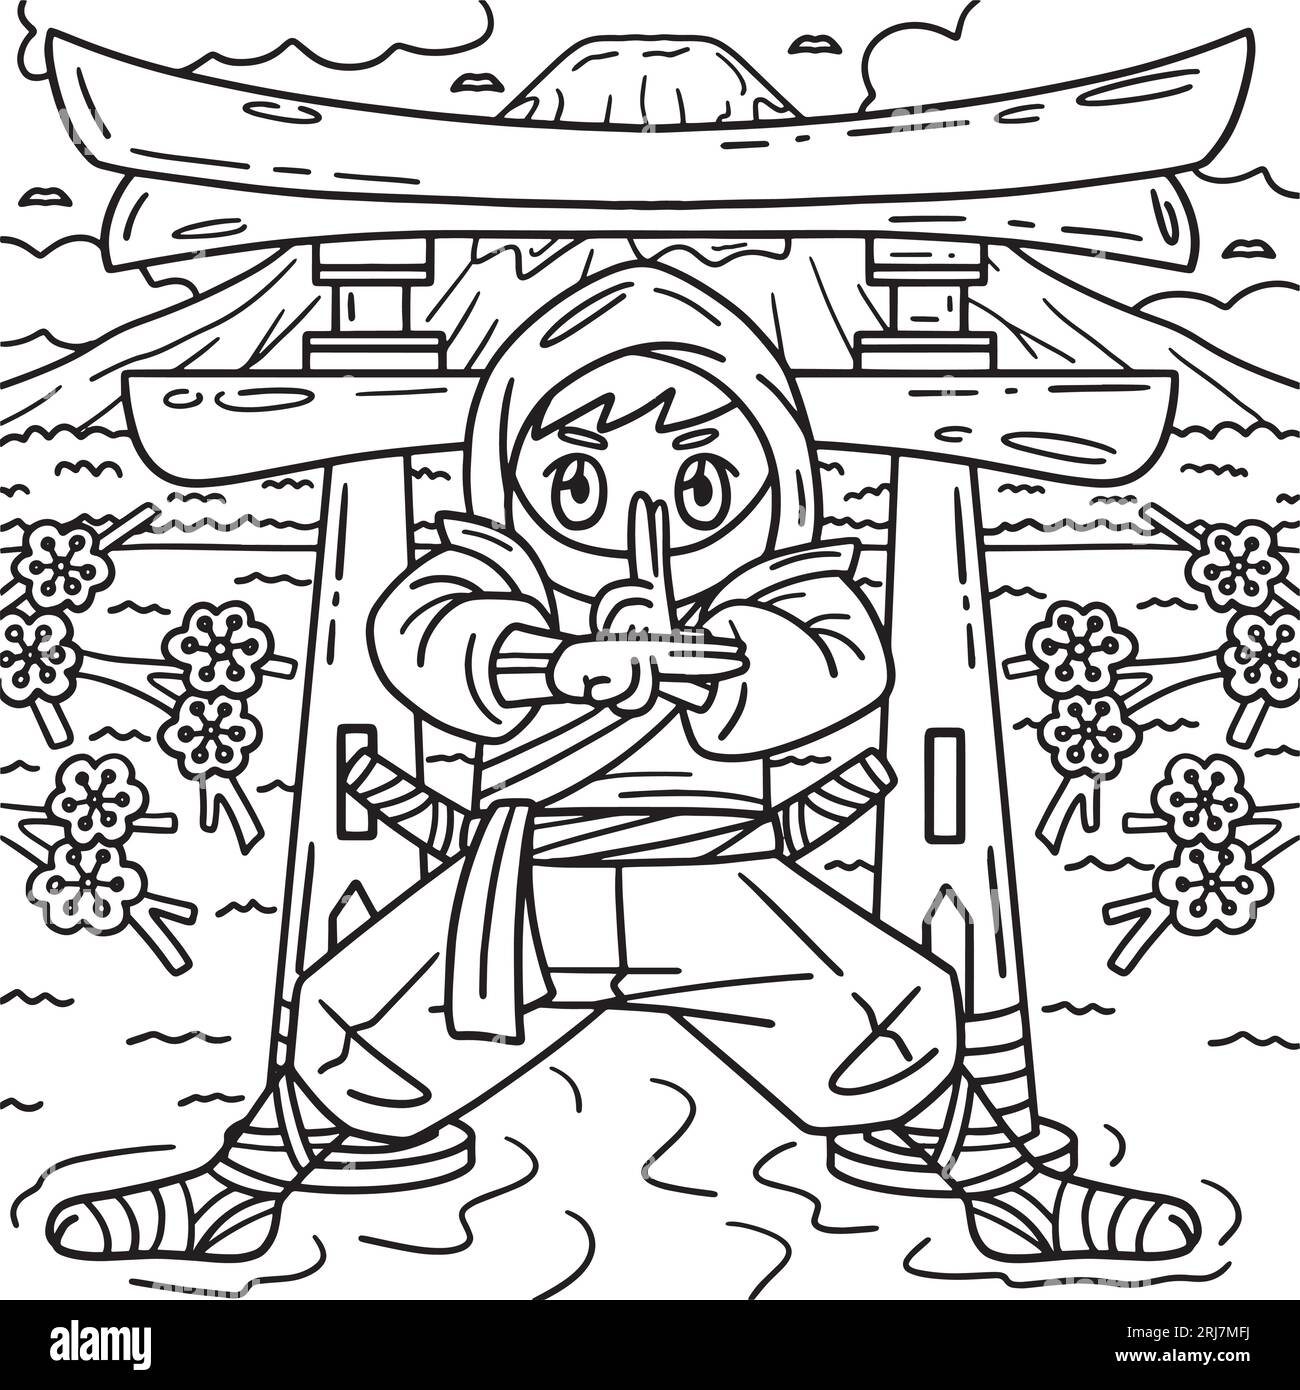 Ninja Standing coloring page  Free Printable Coloring Pages